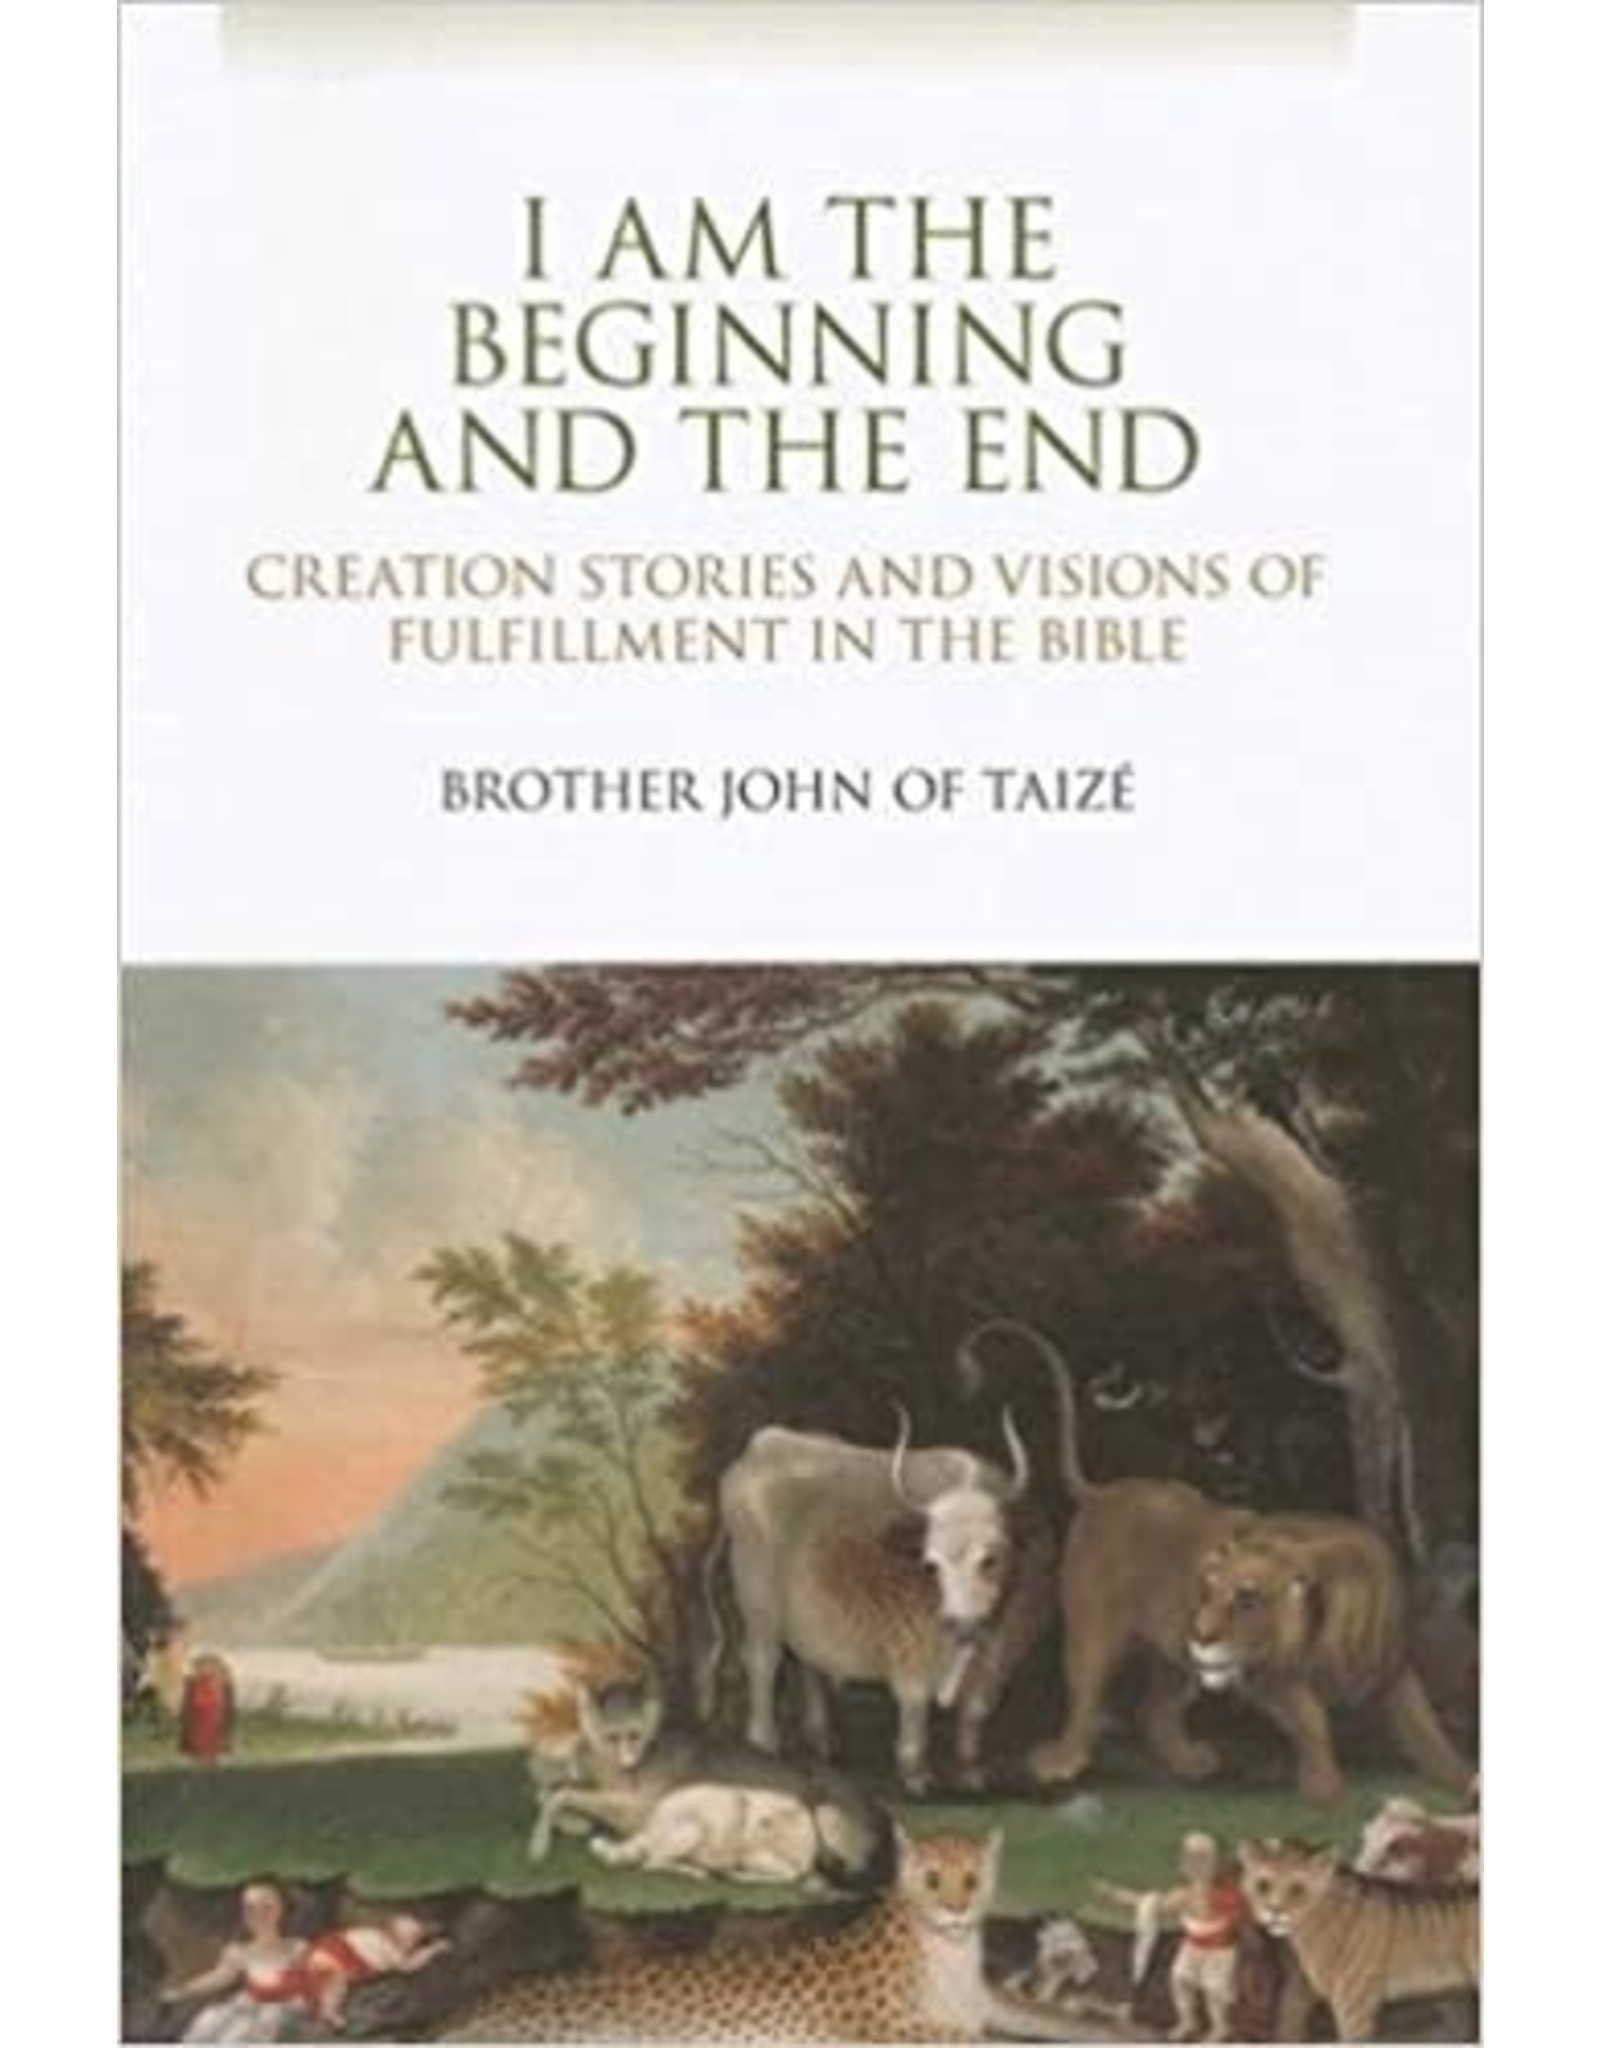 I Am the Beginning and the End: Creation Stories and Visions of Fulfillment in the Bible